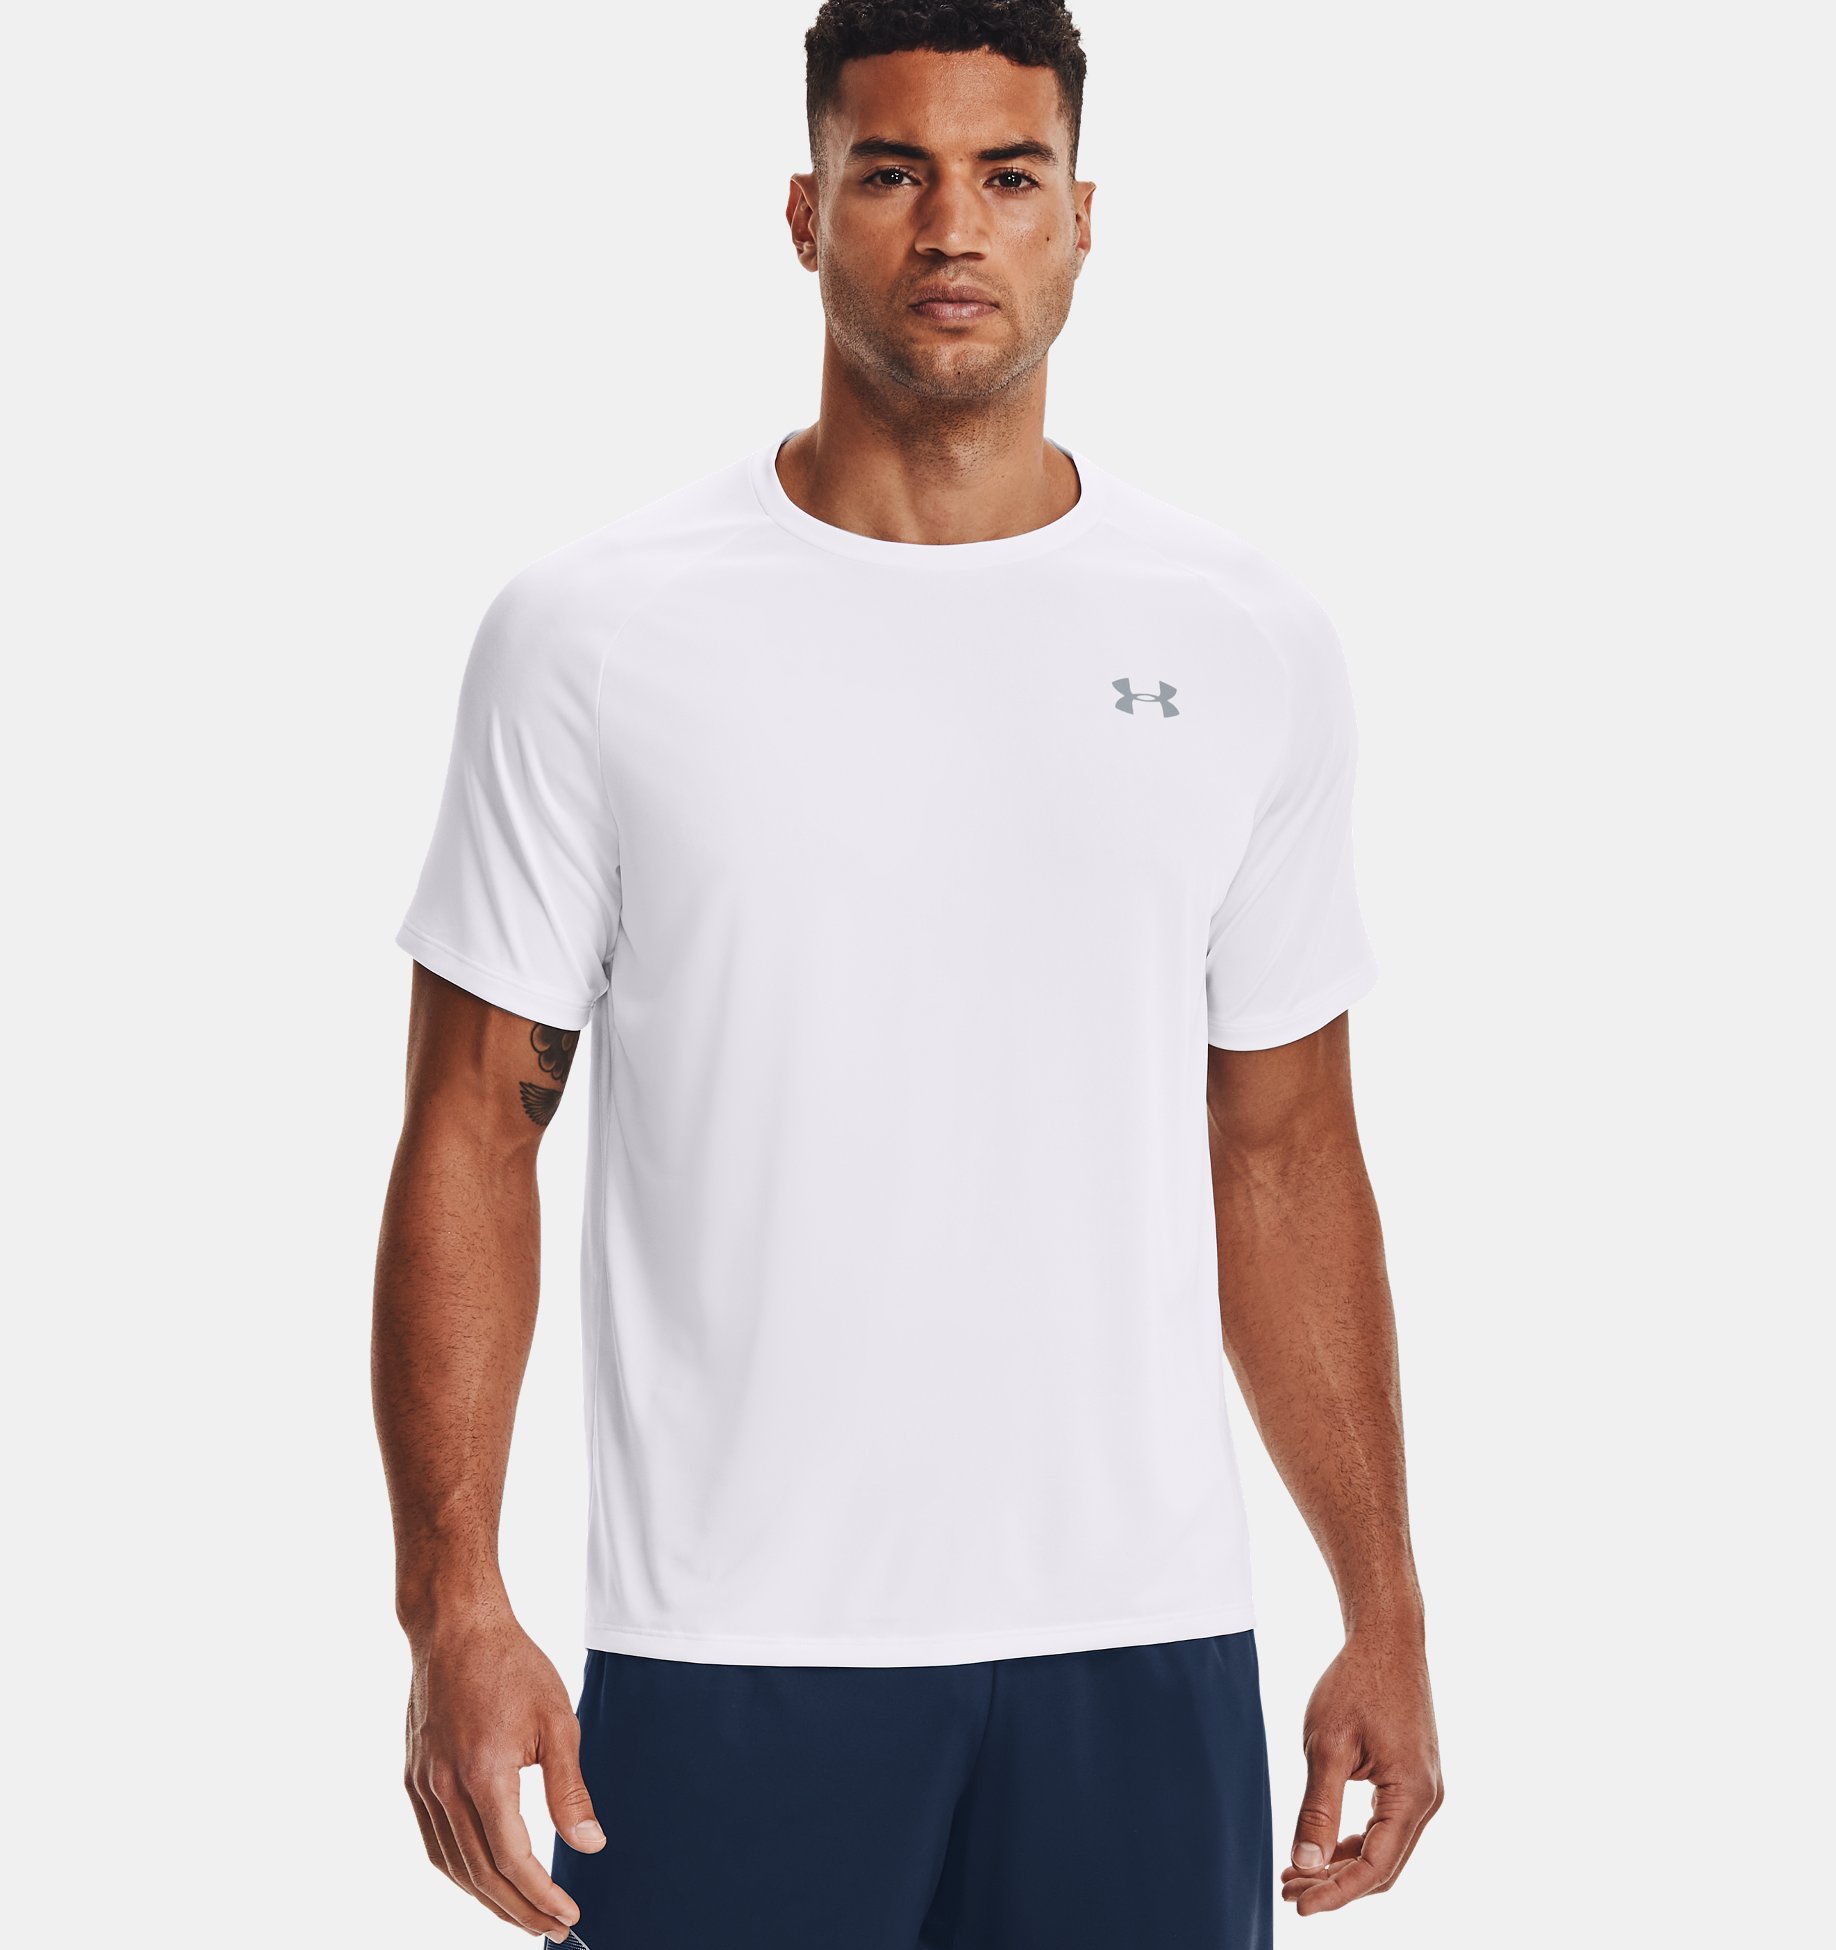 New Under Armour Tech Men's Athletic Short Sleeve T Shirt 1228539 All Colors 